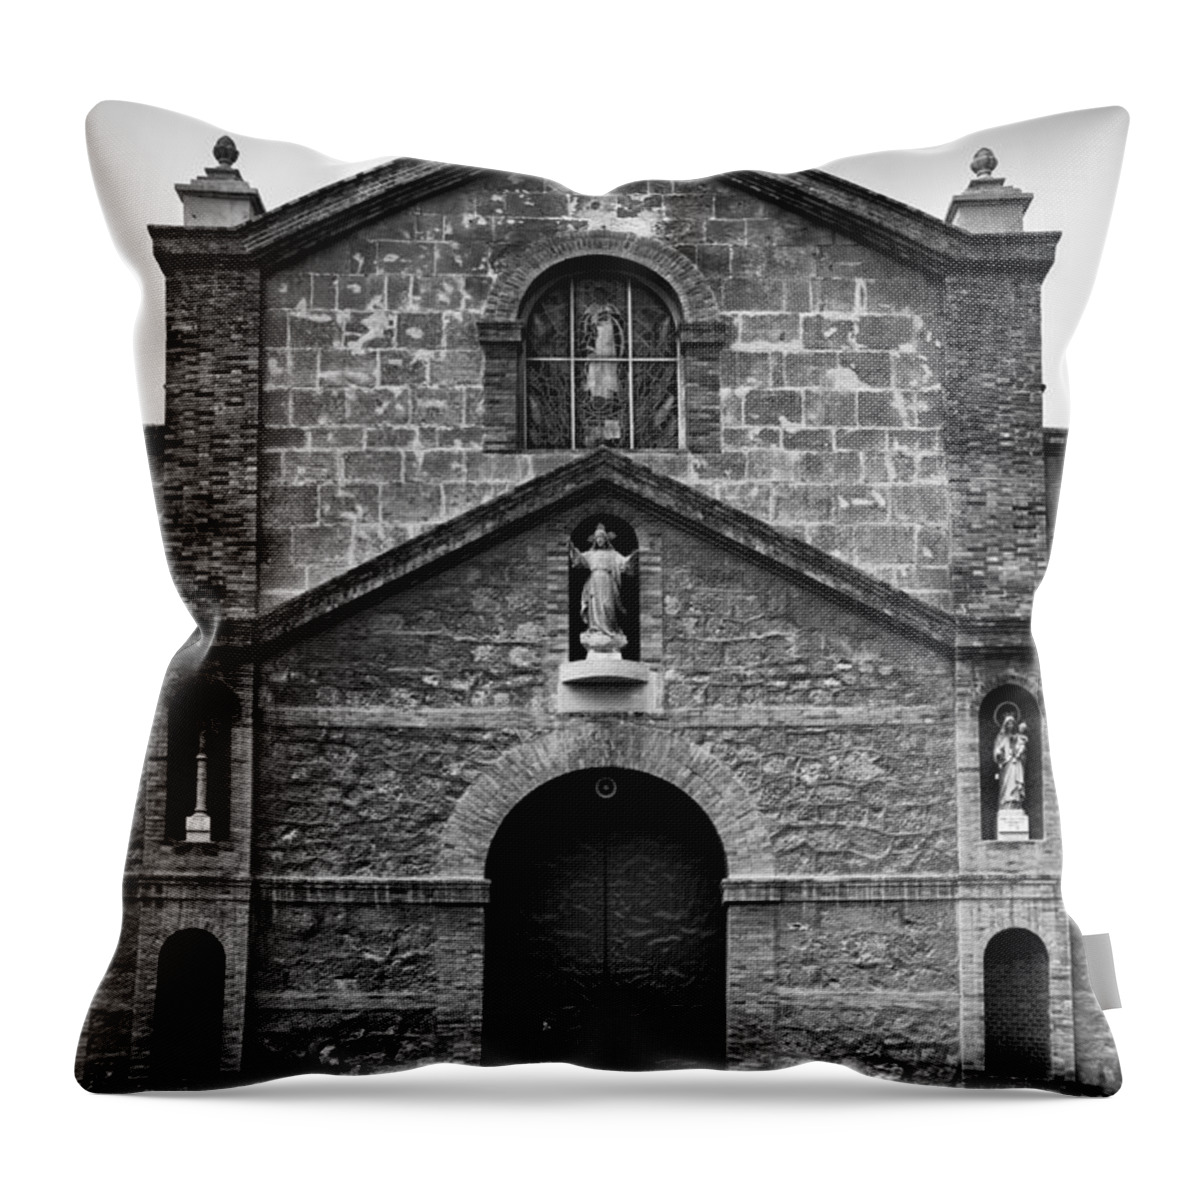 God Throw Pillow featuring the photograph God's Messenger by Nigel R Bell